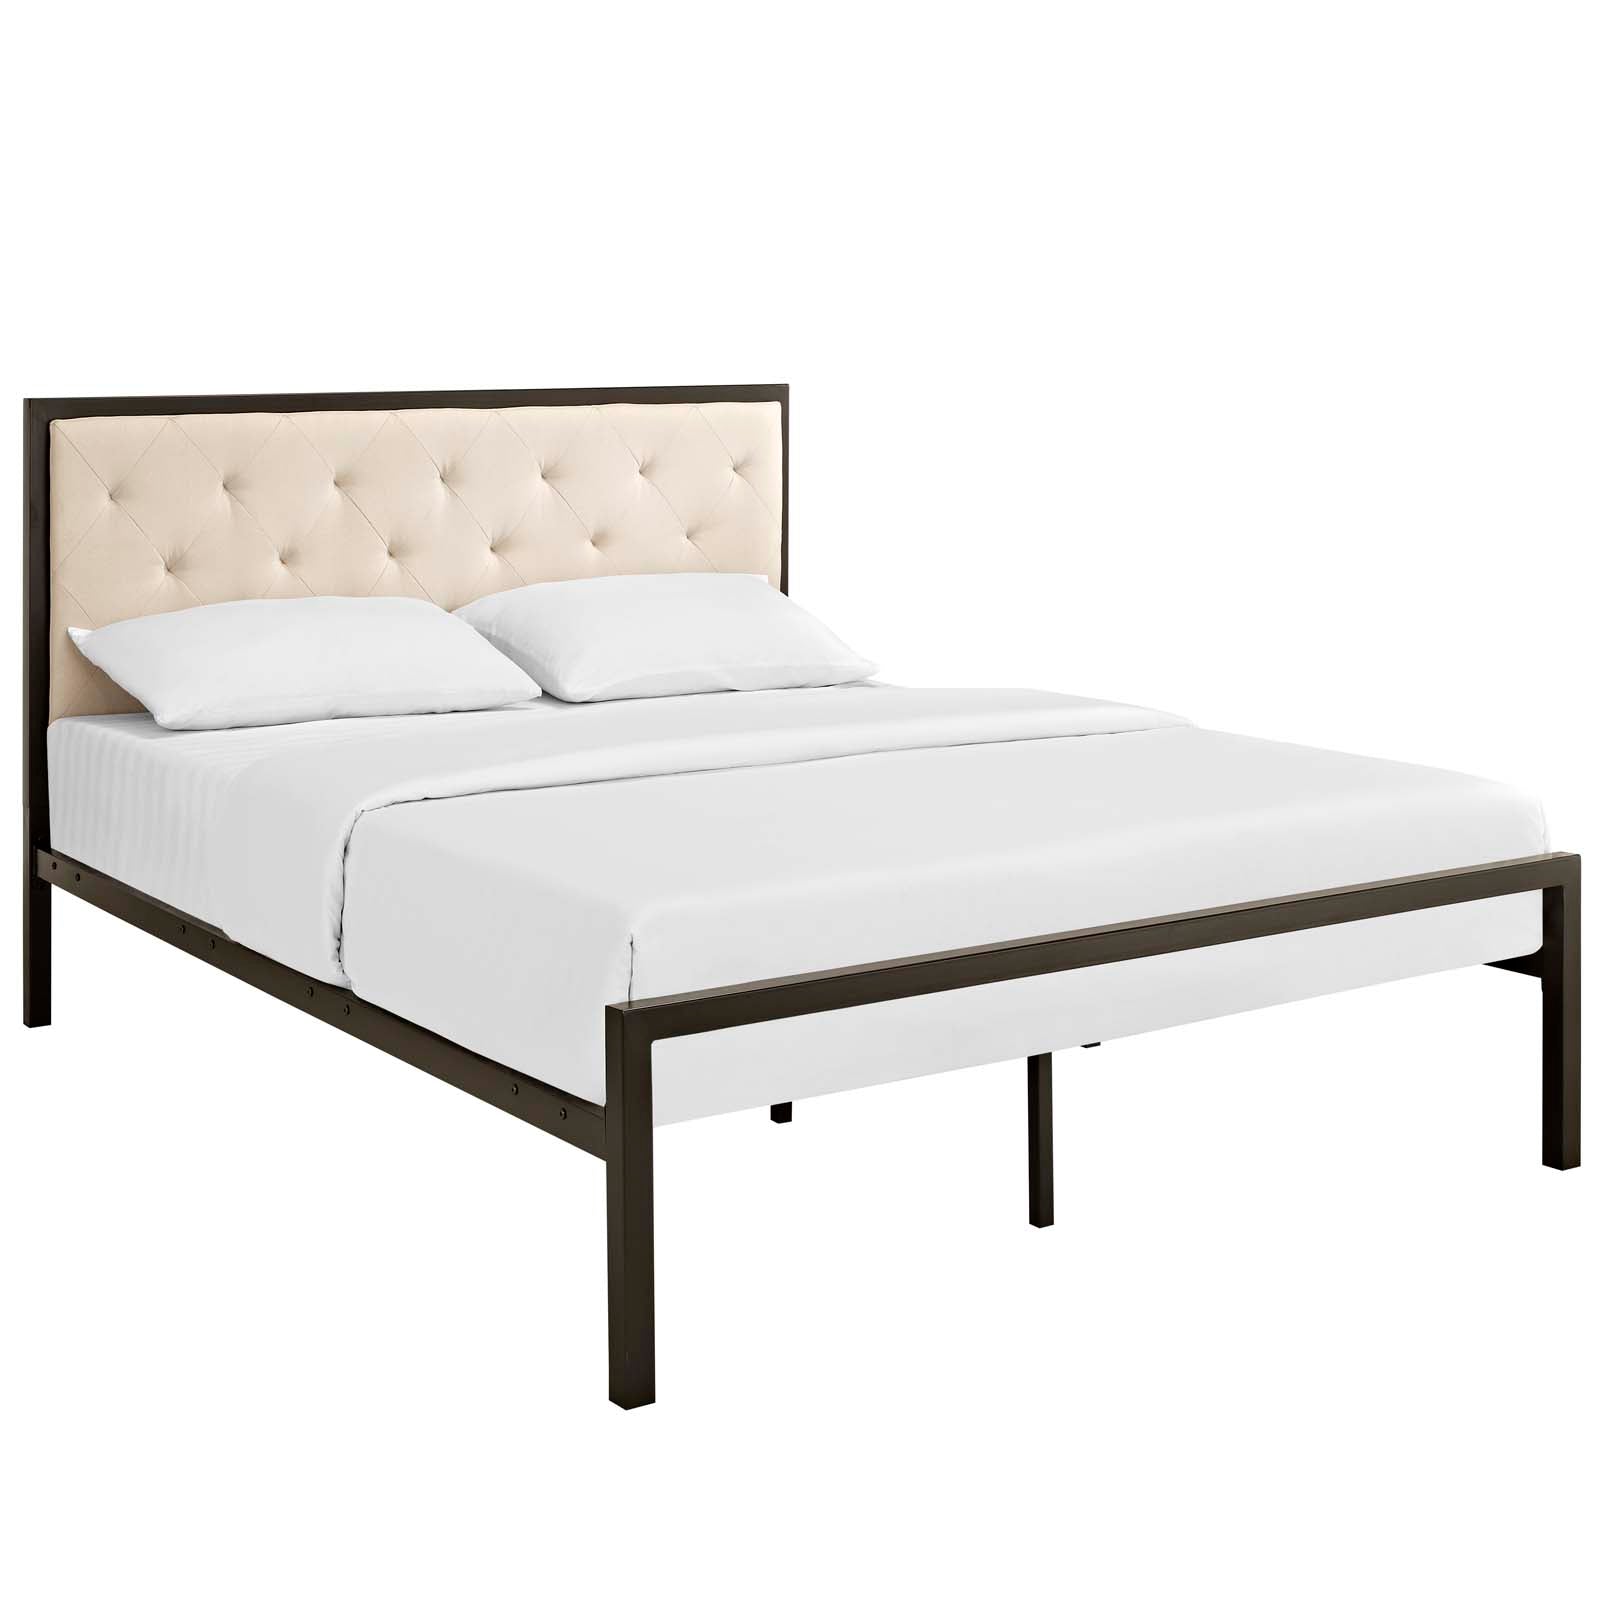 Mia Queen Fabric Bed - East Shore Modern Home Furnishings